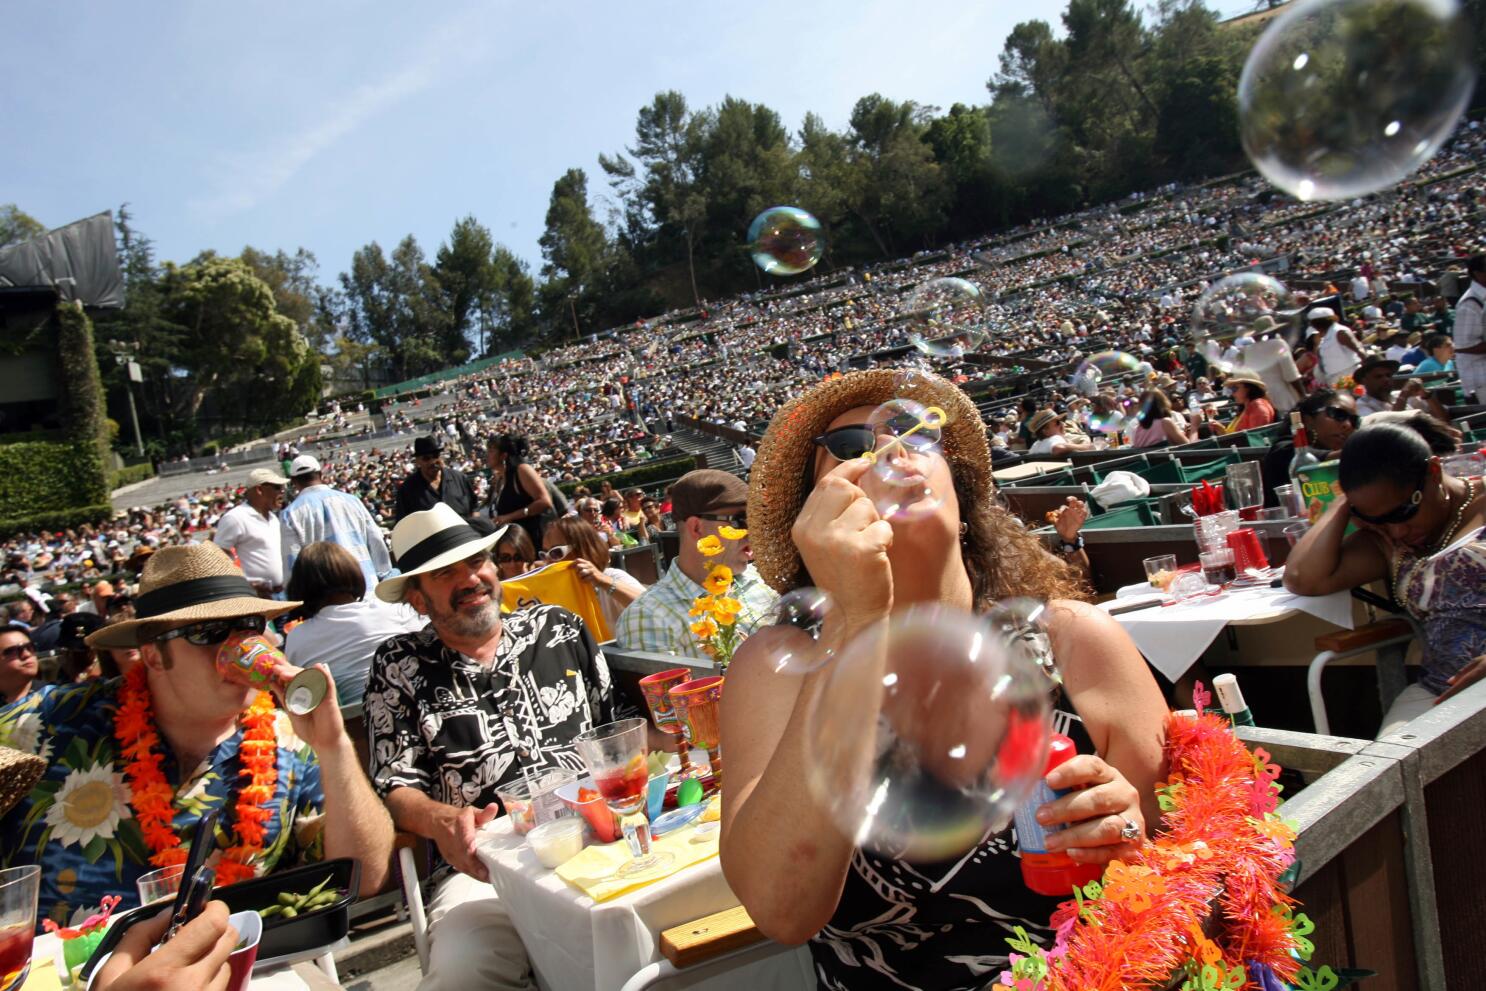 Readers share memories of the Beatles, romance at Hollywood Bowl 